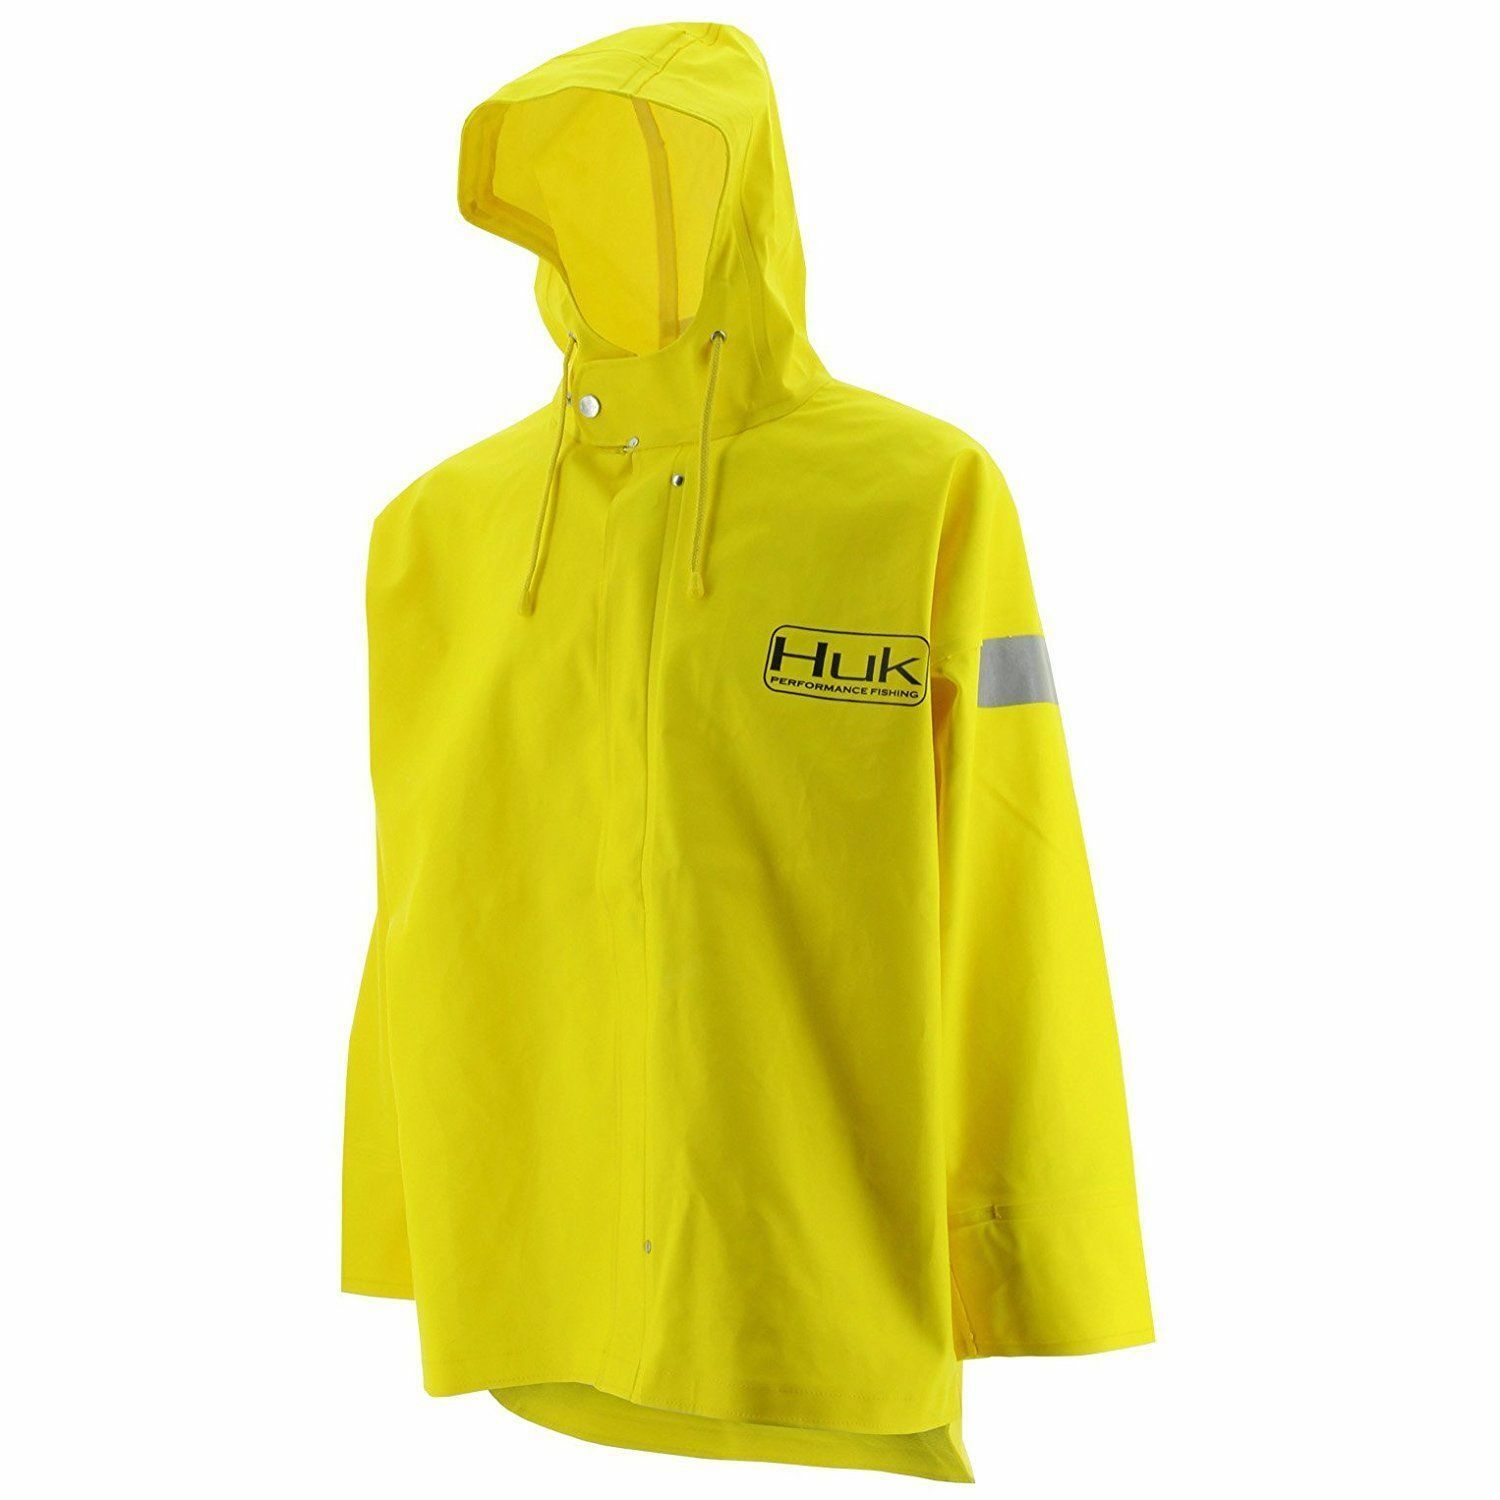 Huk Commercial Grade PVC Waterproof Foul Weather Jacket Yellow Size 2XL